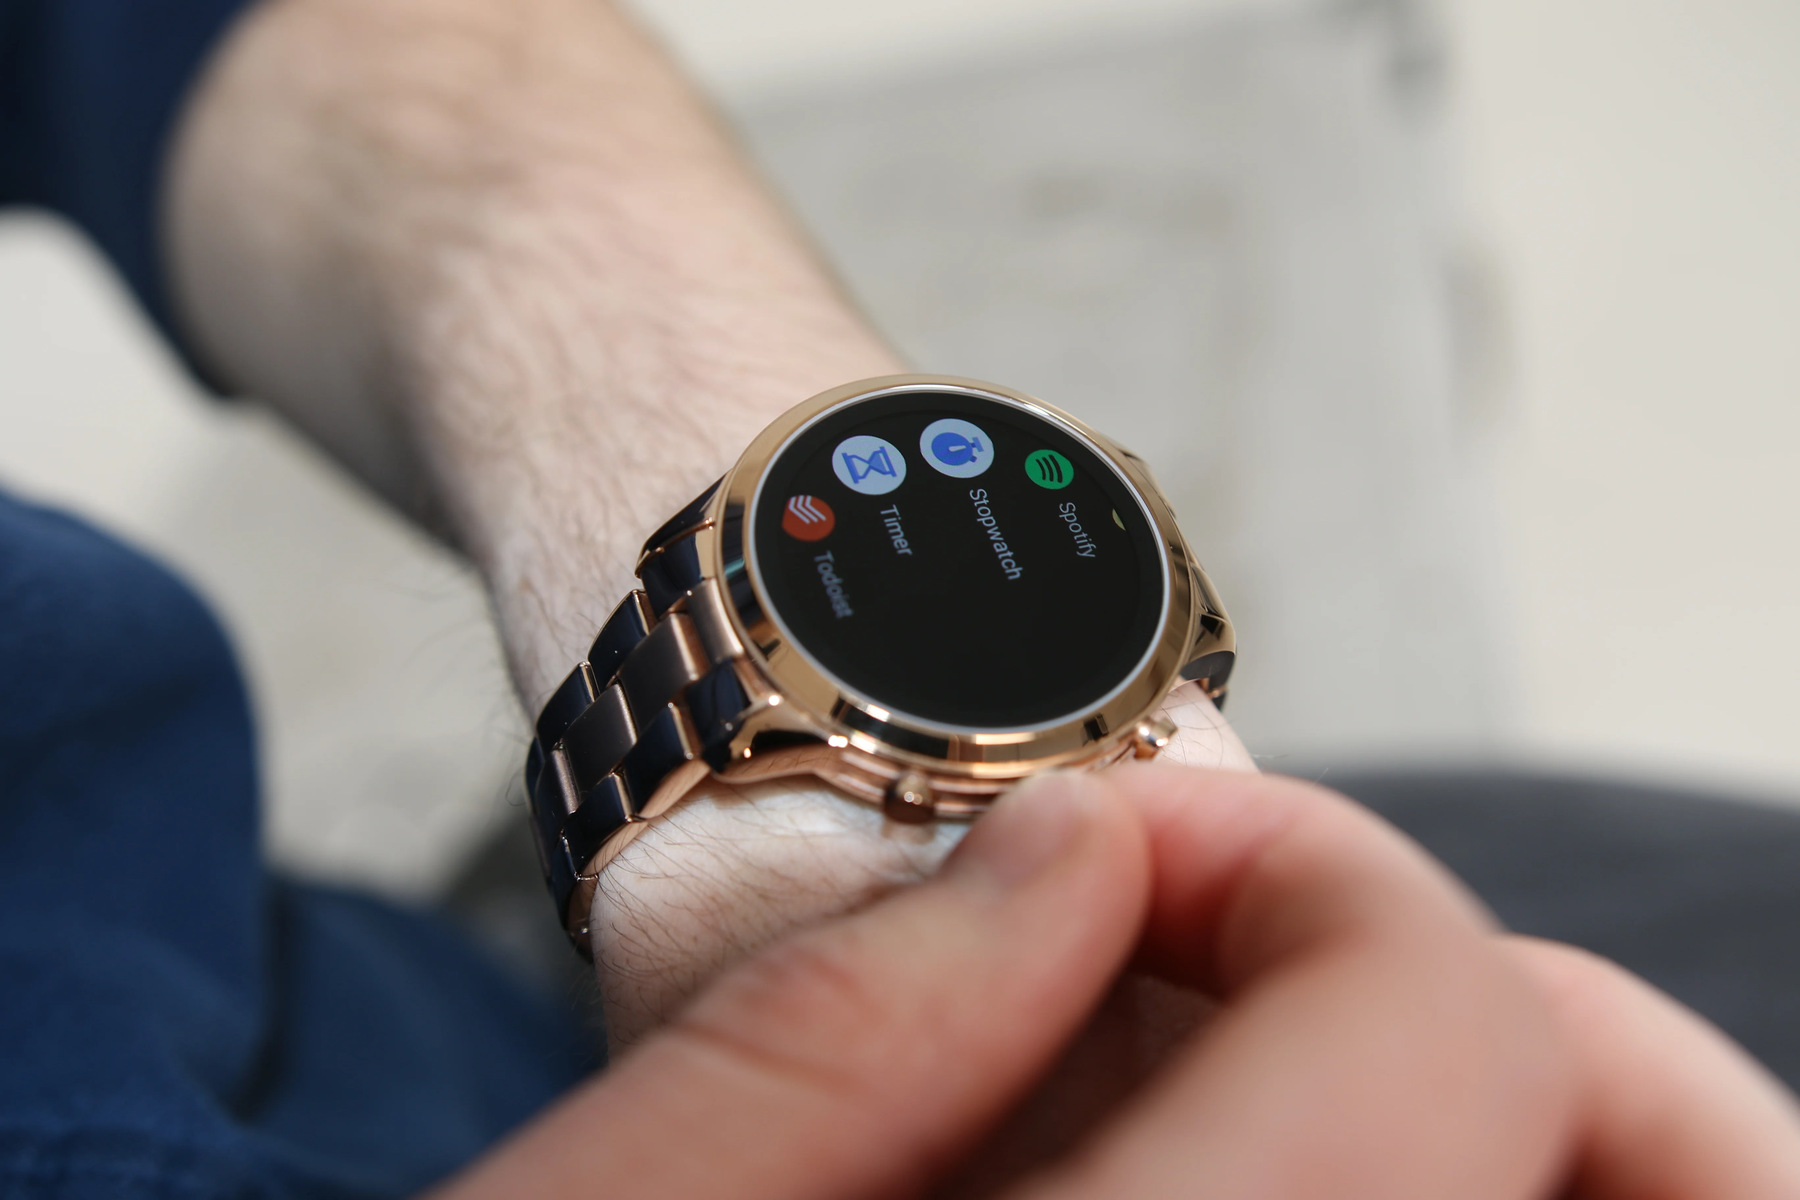 Step-by-Step: Connecting Michael Kors Smartwatch To Android